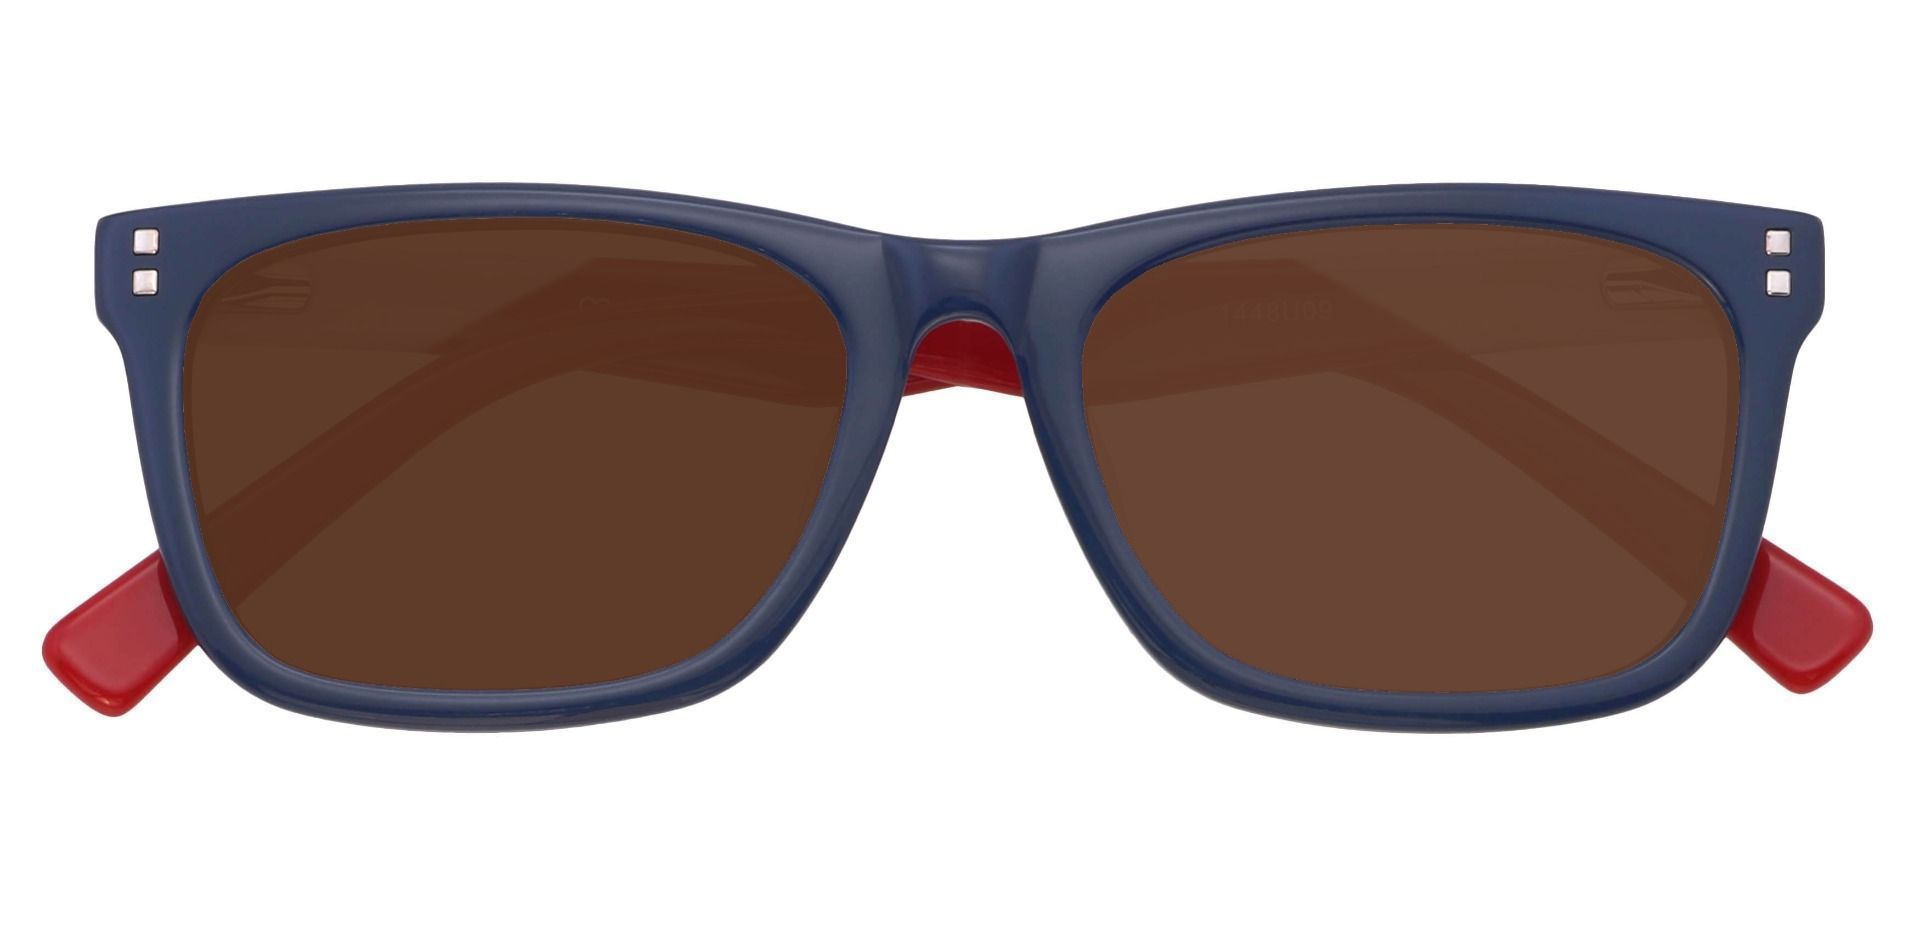 Quincy Rectangle Reading Sunglasses - Blue Frame With Brown Lenses